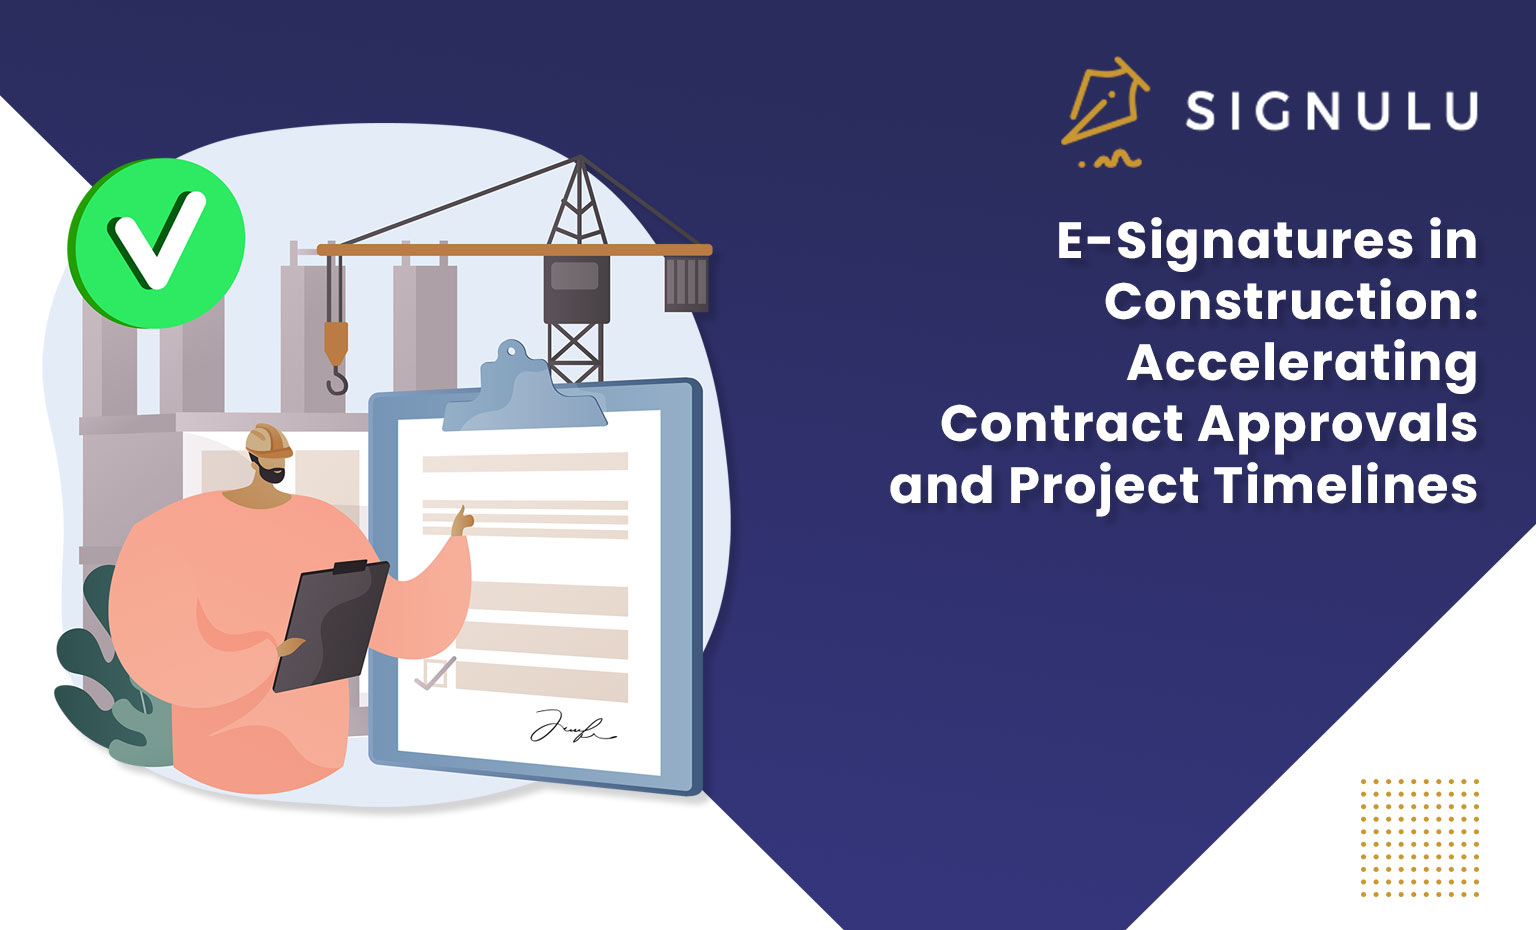 E-Signatures in Construction: Accelerating Contract Approvals and Project Timelines